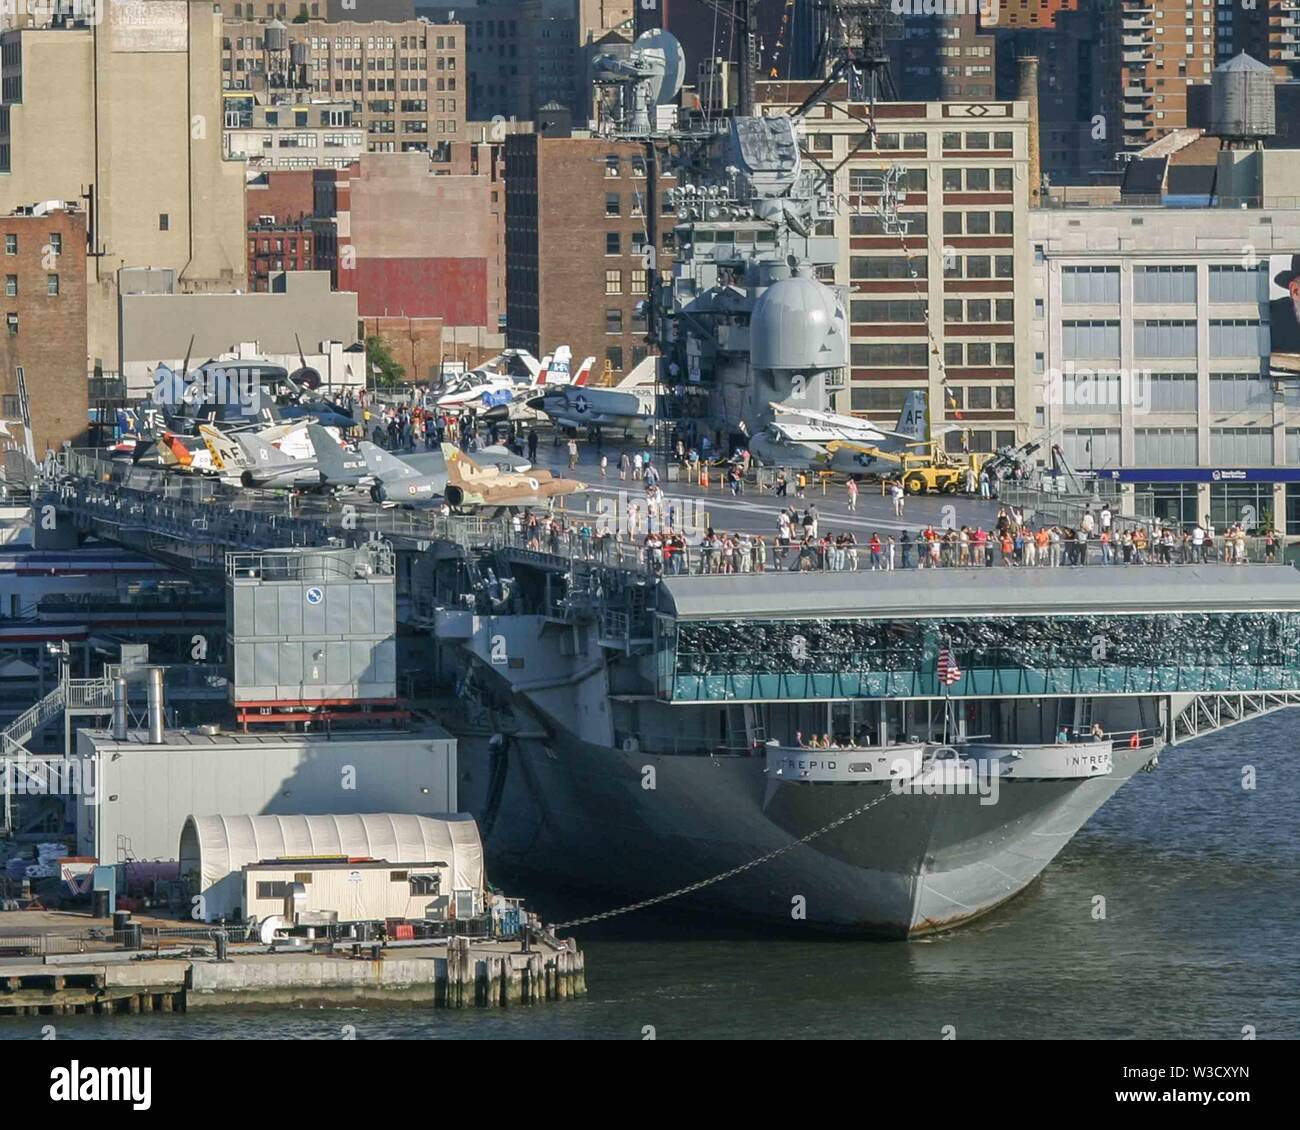 New York, New York, USA. 3rd Sep, 2005. The USS Intrepid, a retired U.S. Navy aircraft carrier, is the major component of the Intrepid Sea, Air & Space Museum, on the Hudson River in midtown Manhattan. Credit: Arnold Drapkin/ZUMA Wire/Alamy Live News Stock Photo